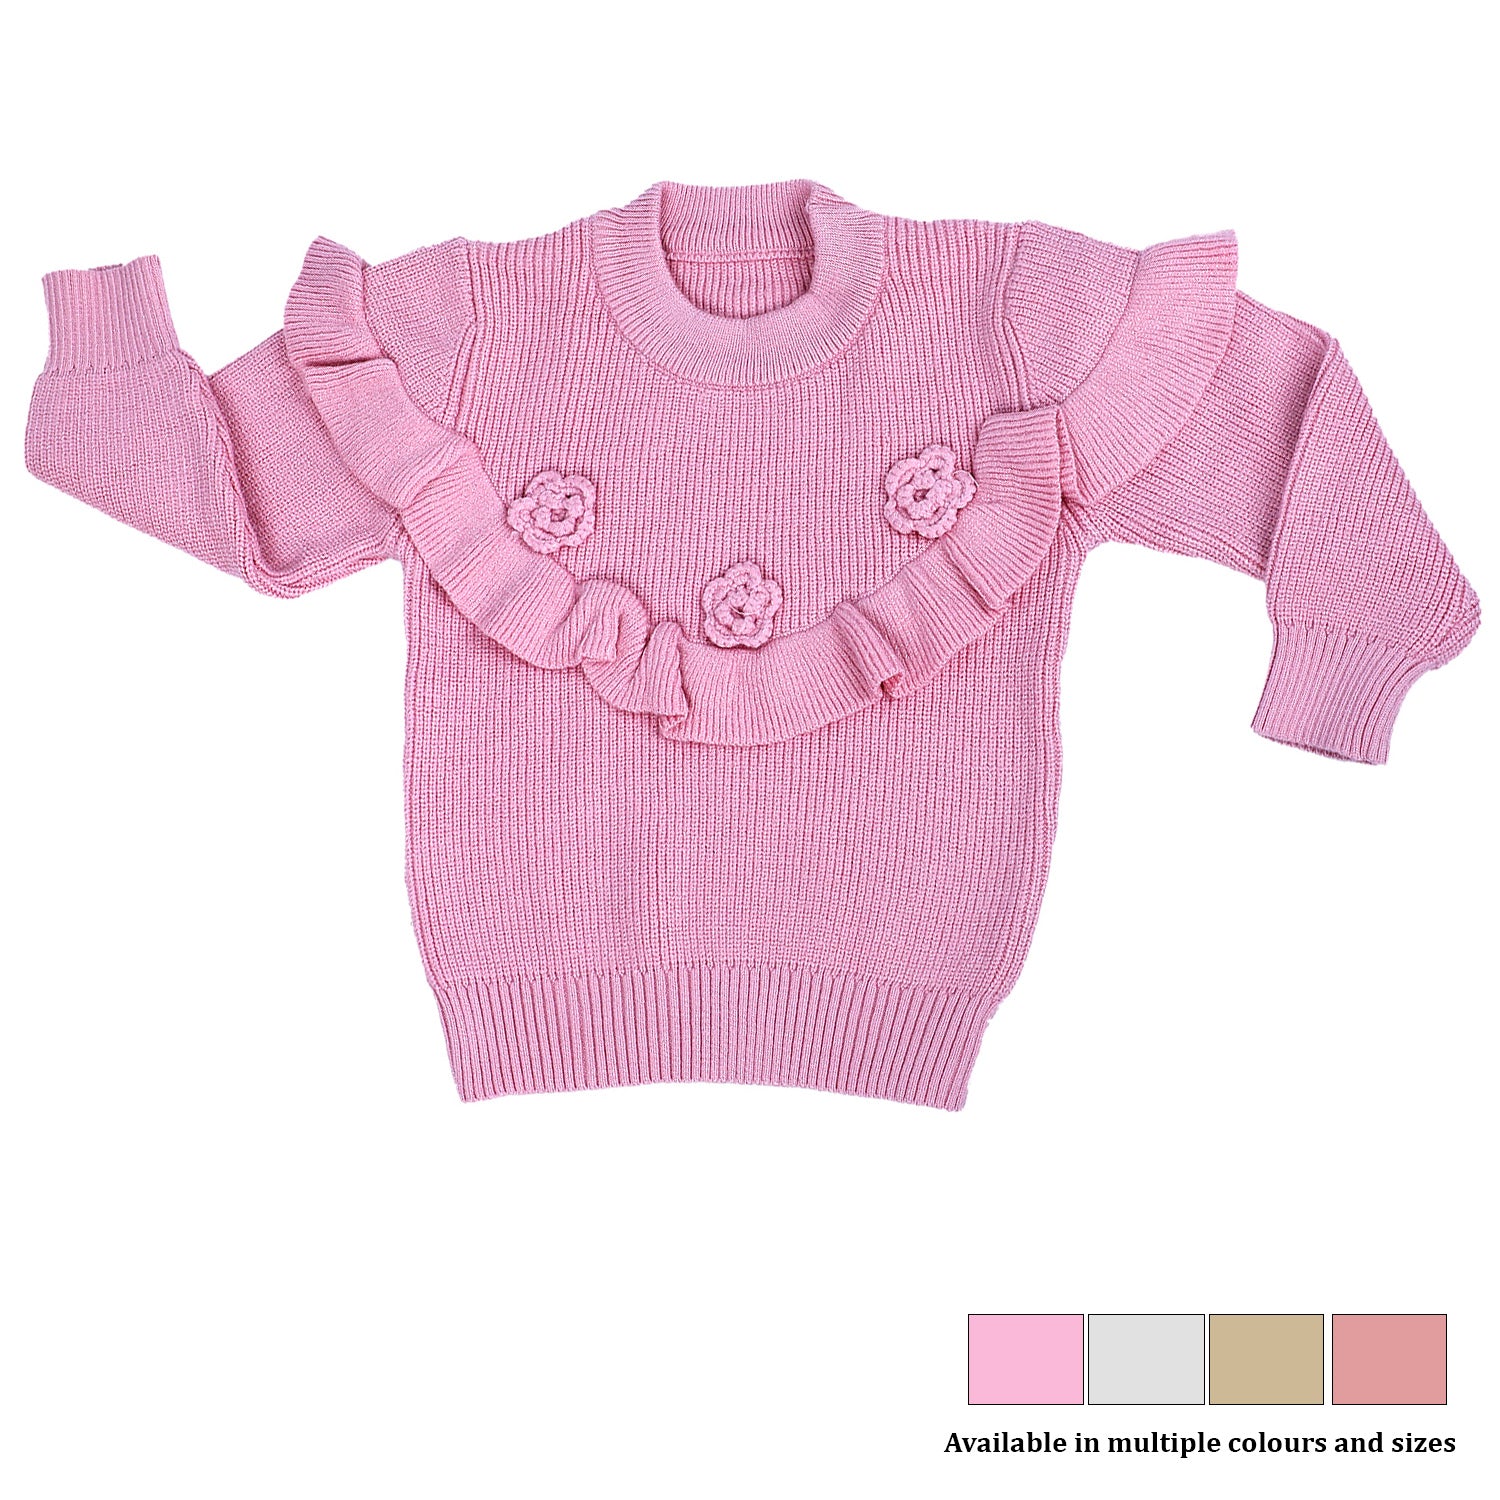 Flowers And Frills Premium Full Sleeves Knitted Sweater - Pink - Baby Moo